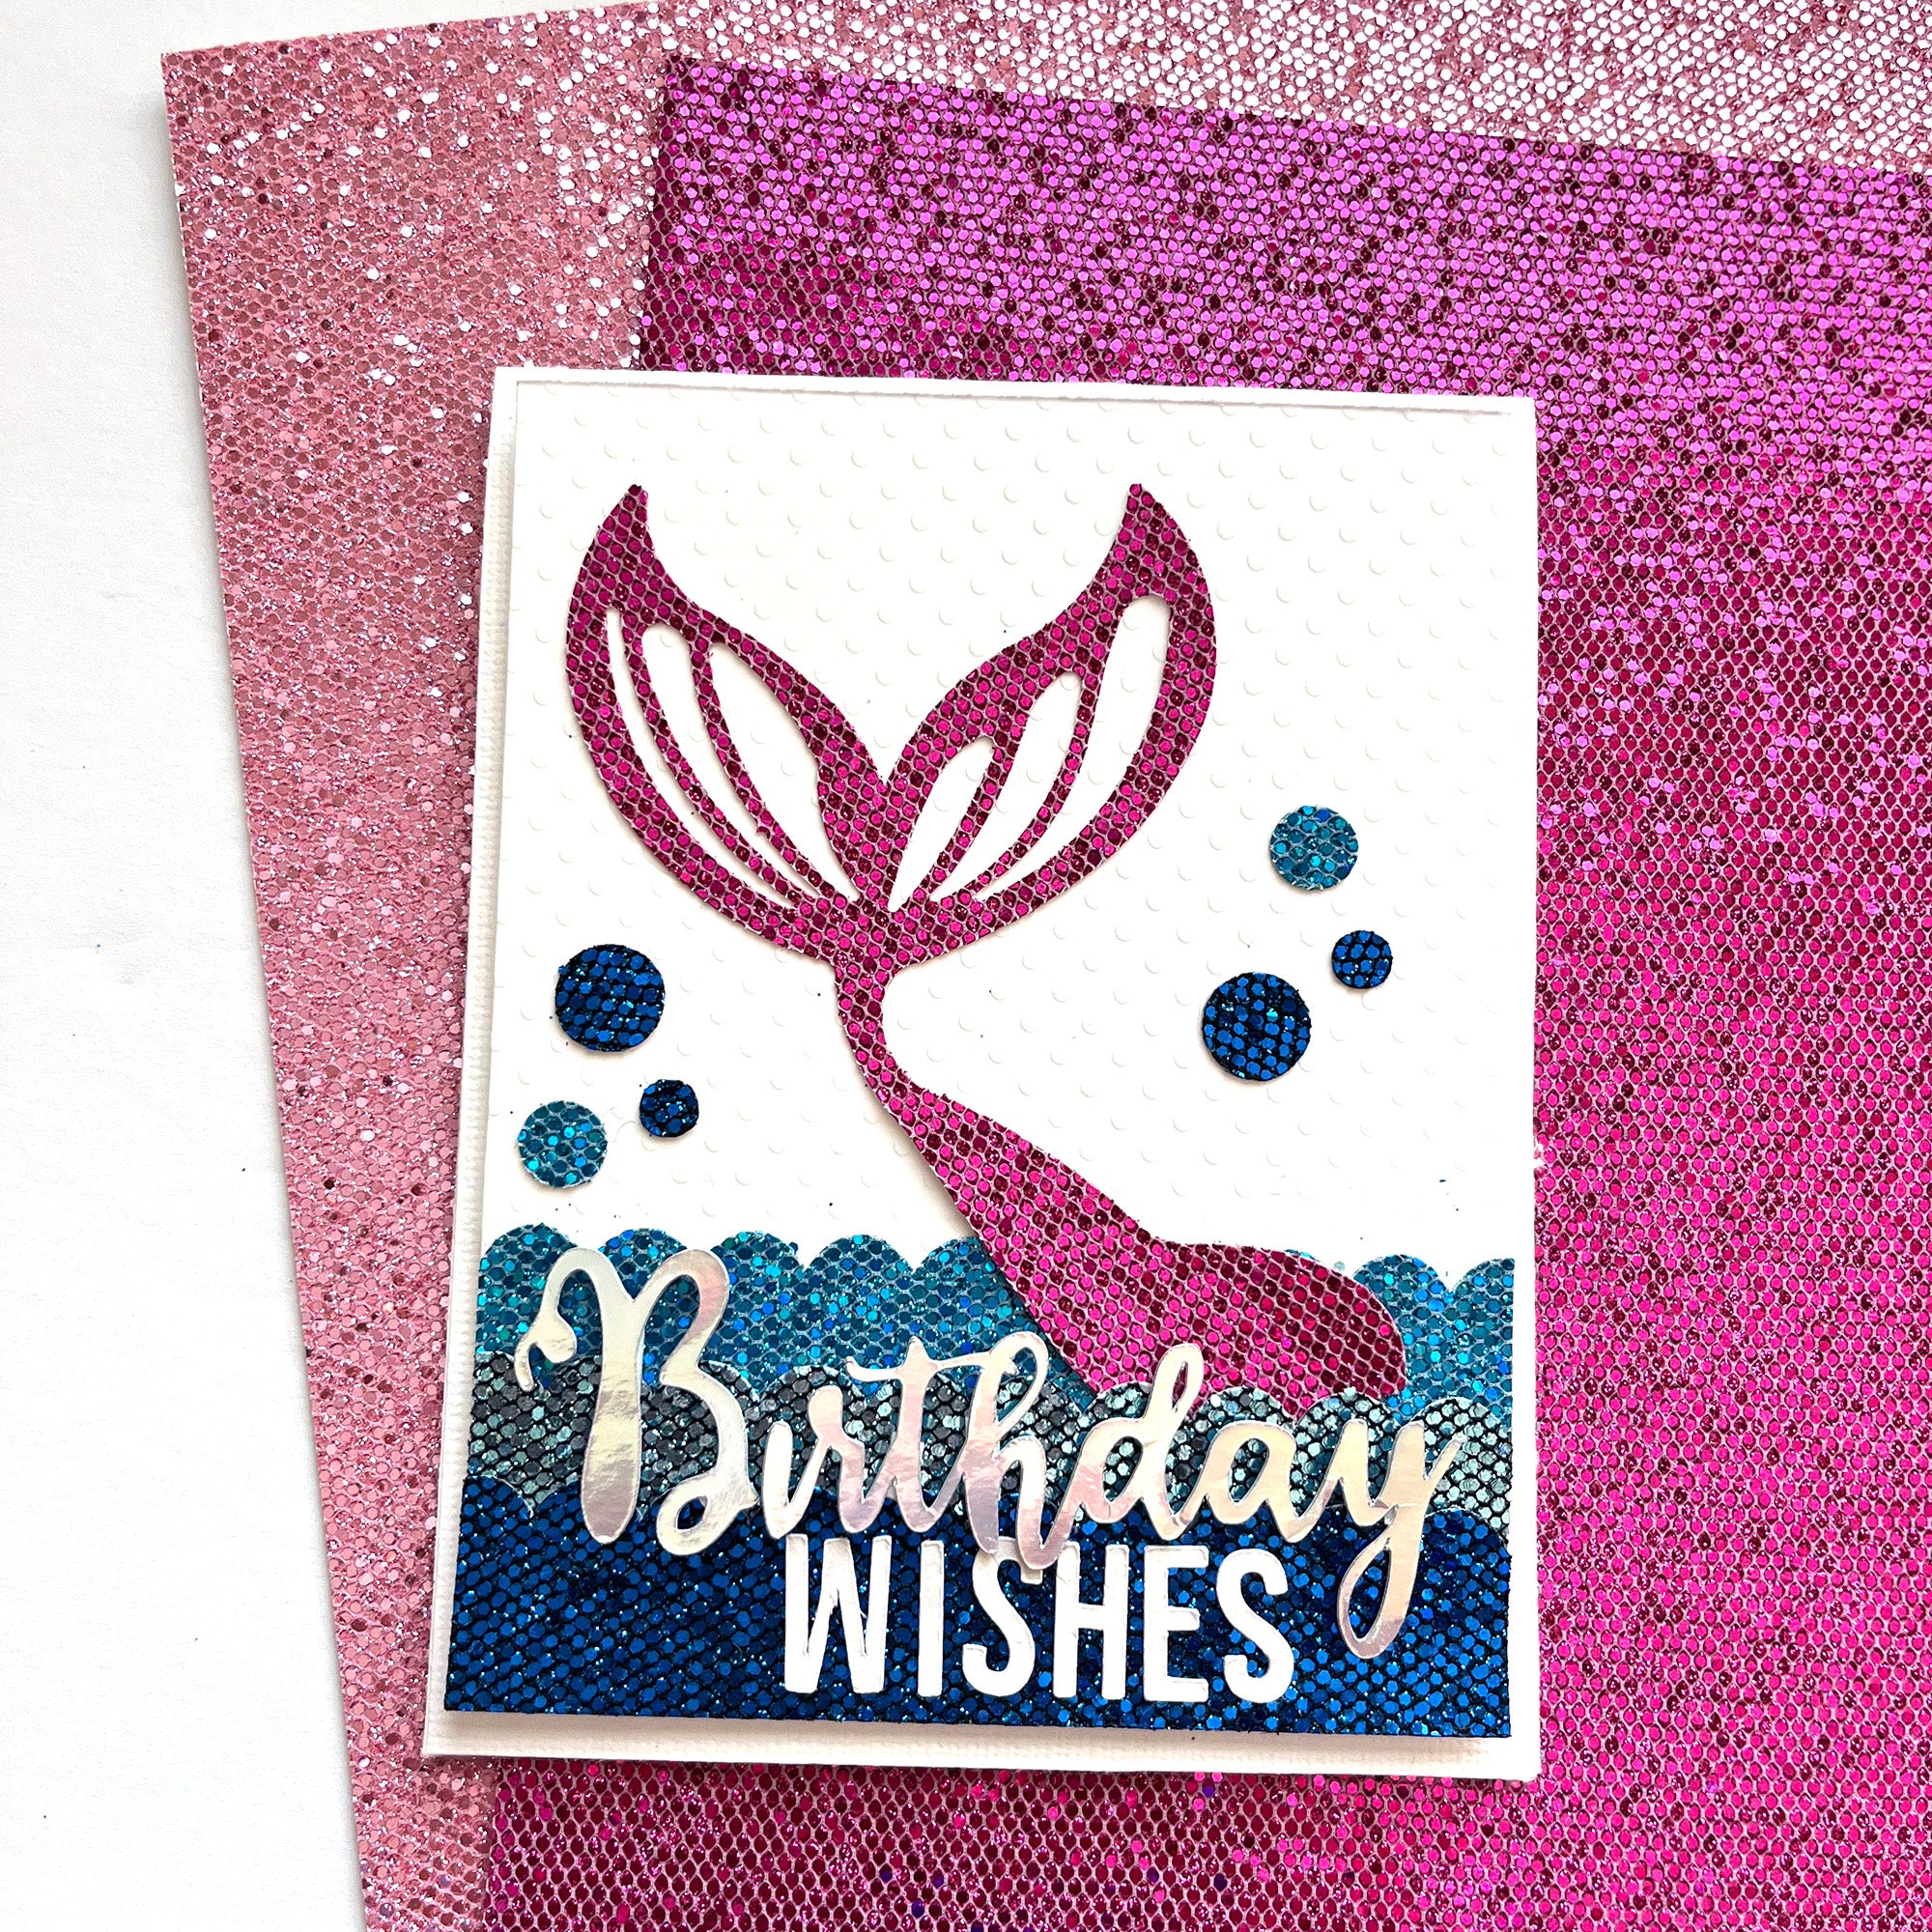 Grey Luxe Vellum – Sparkly Paper Co.